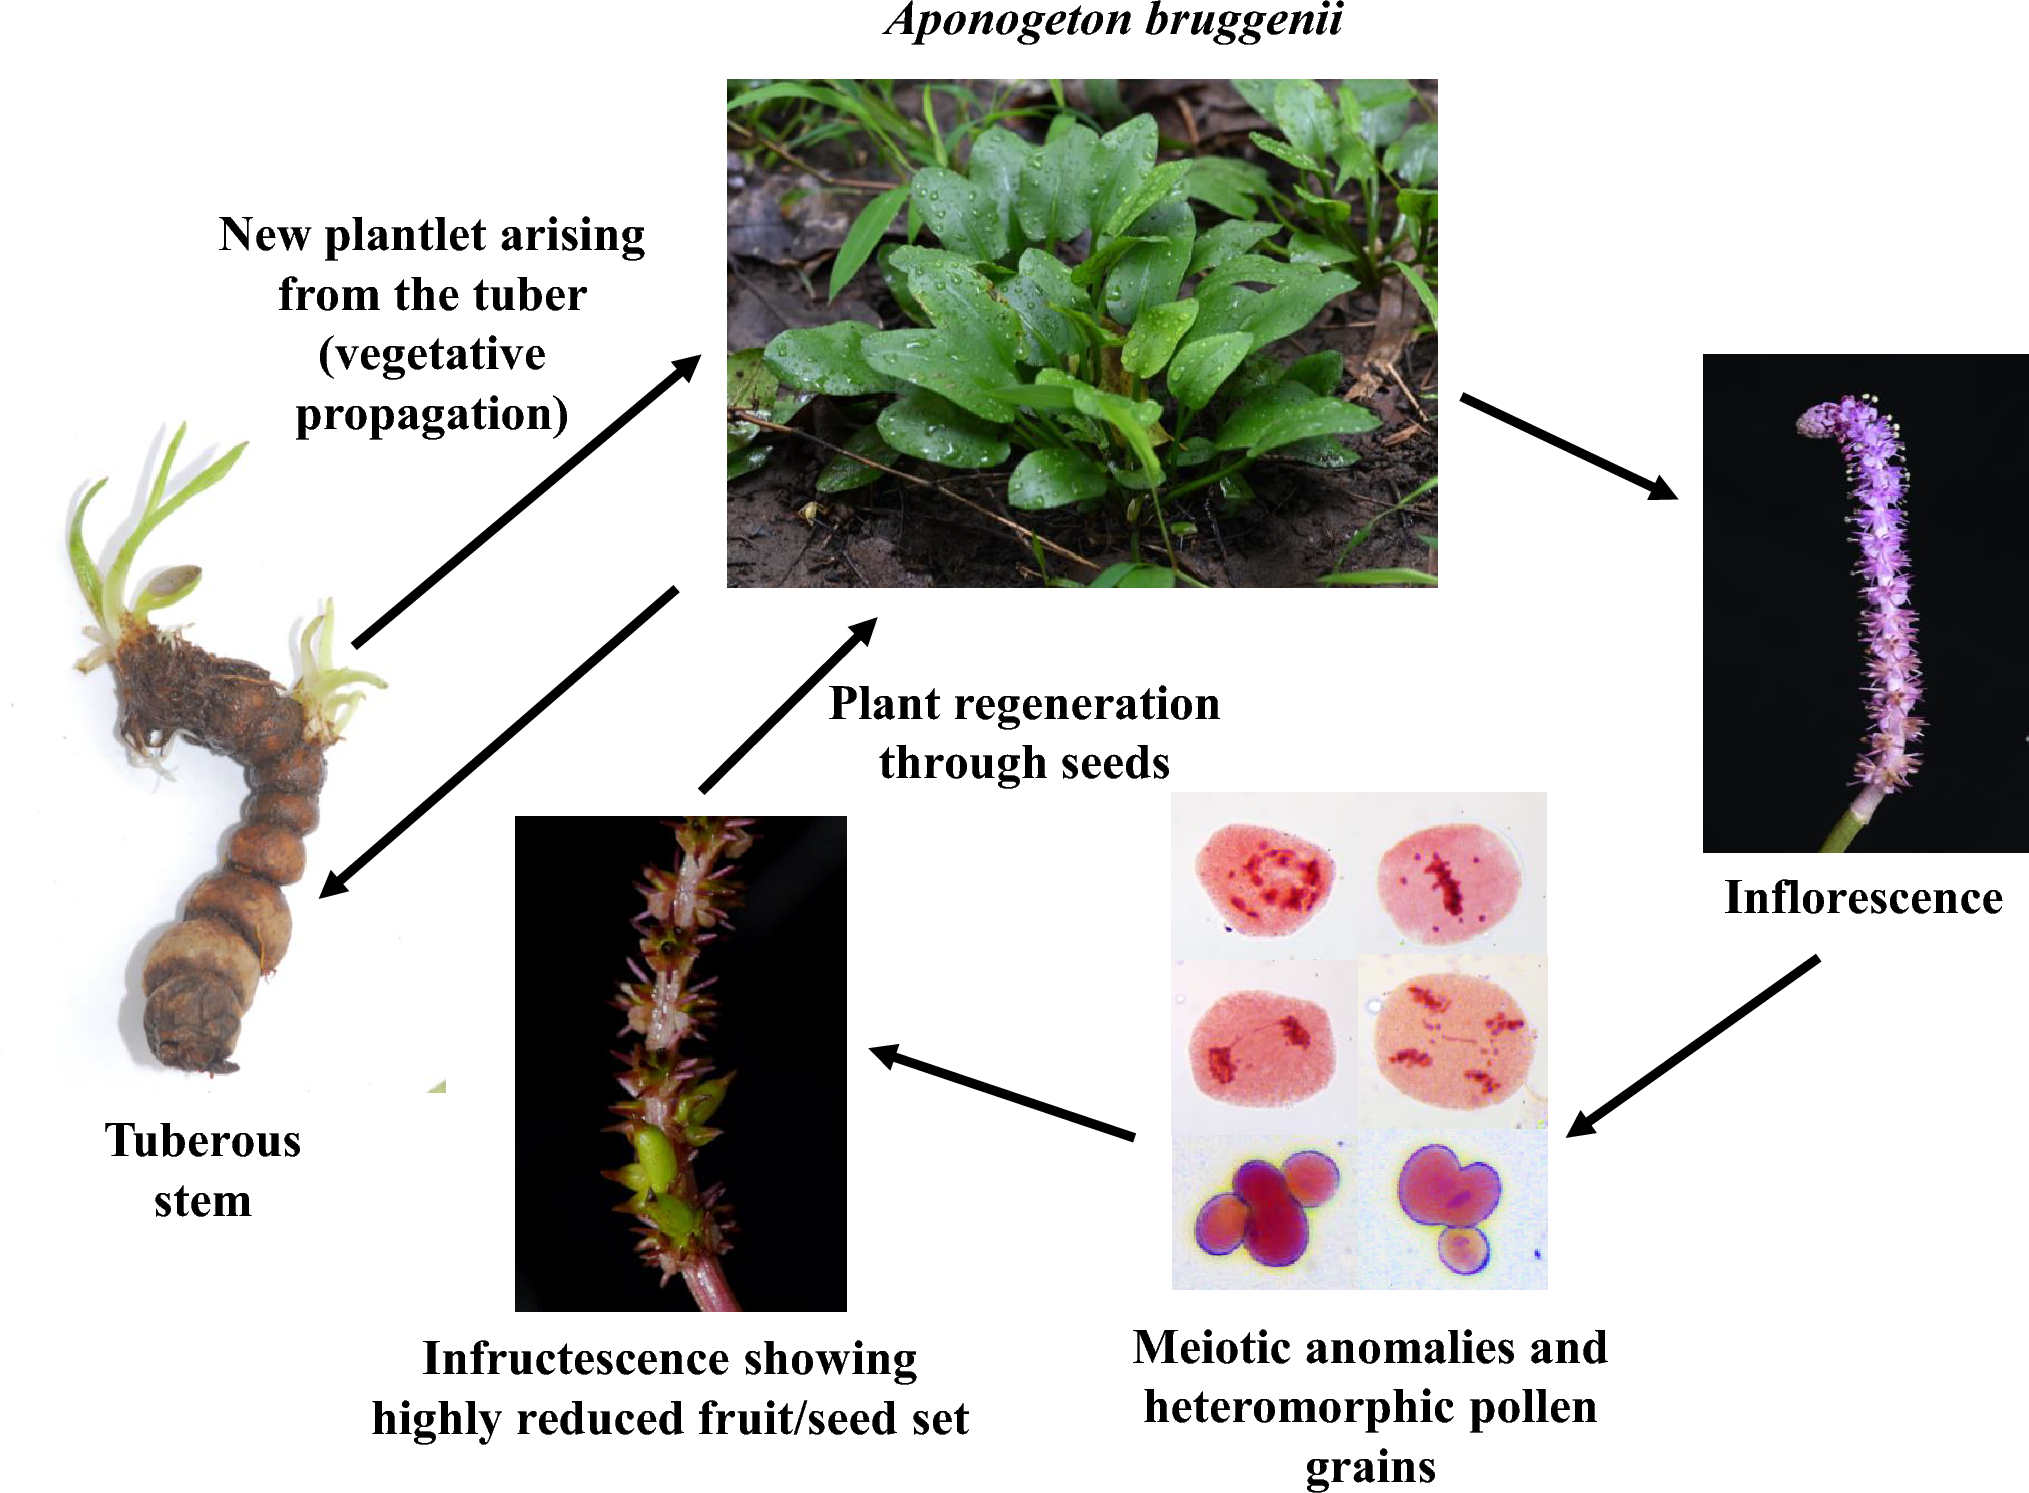 Asexual propagation could be an escape to sustain the constraints of inefficient gametic system in the evolving endemic species: evidence from meiotic anomalies encountered in Aponogeton bruggenii (Aponogetonaceae)